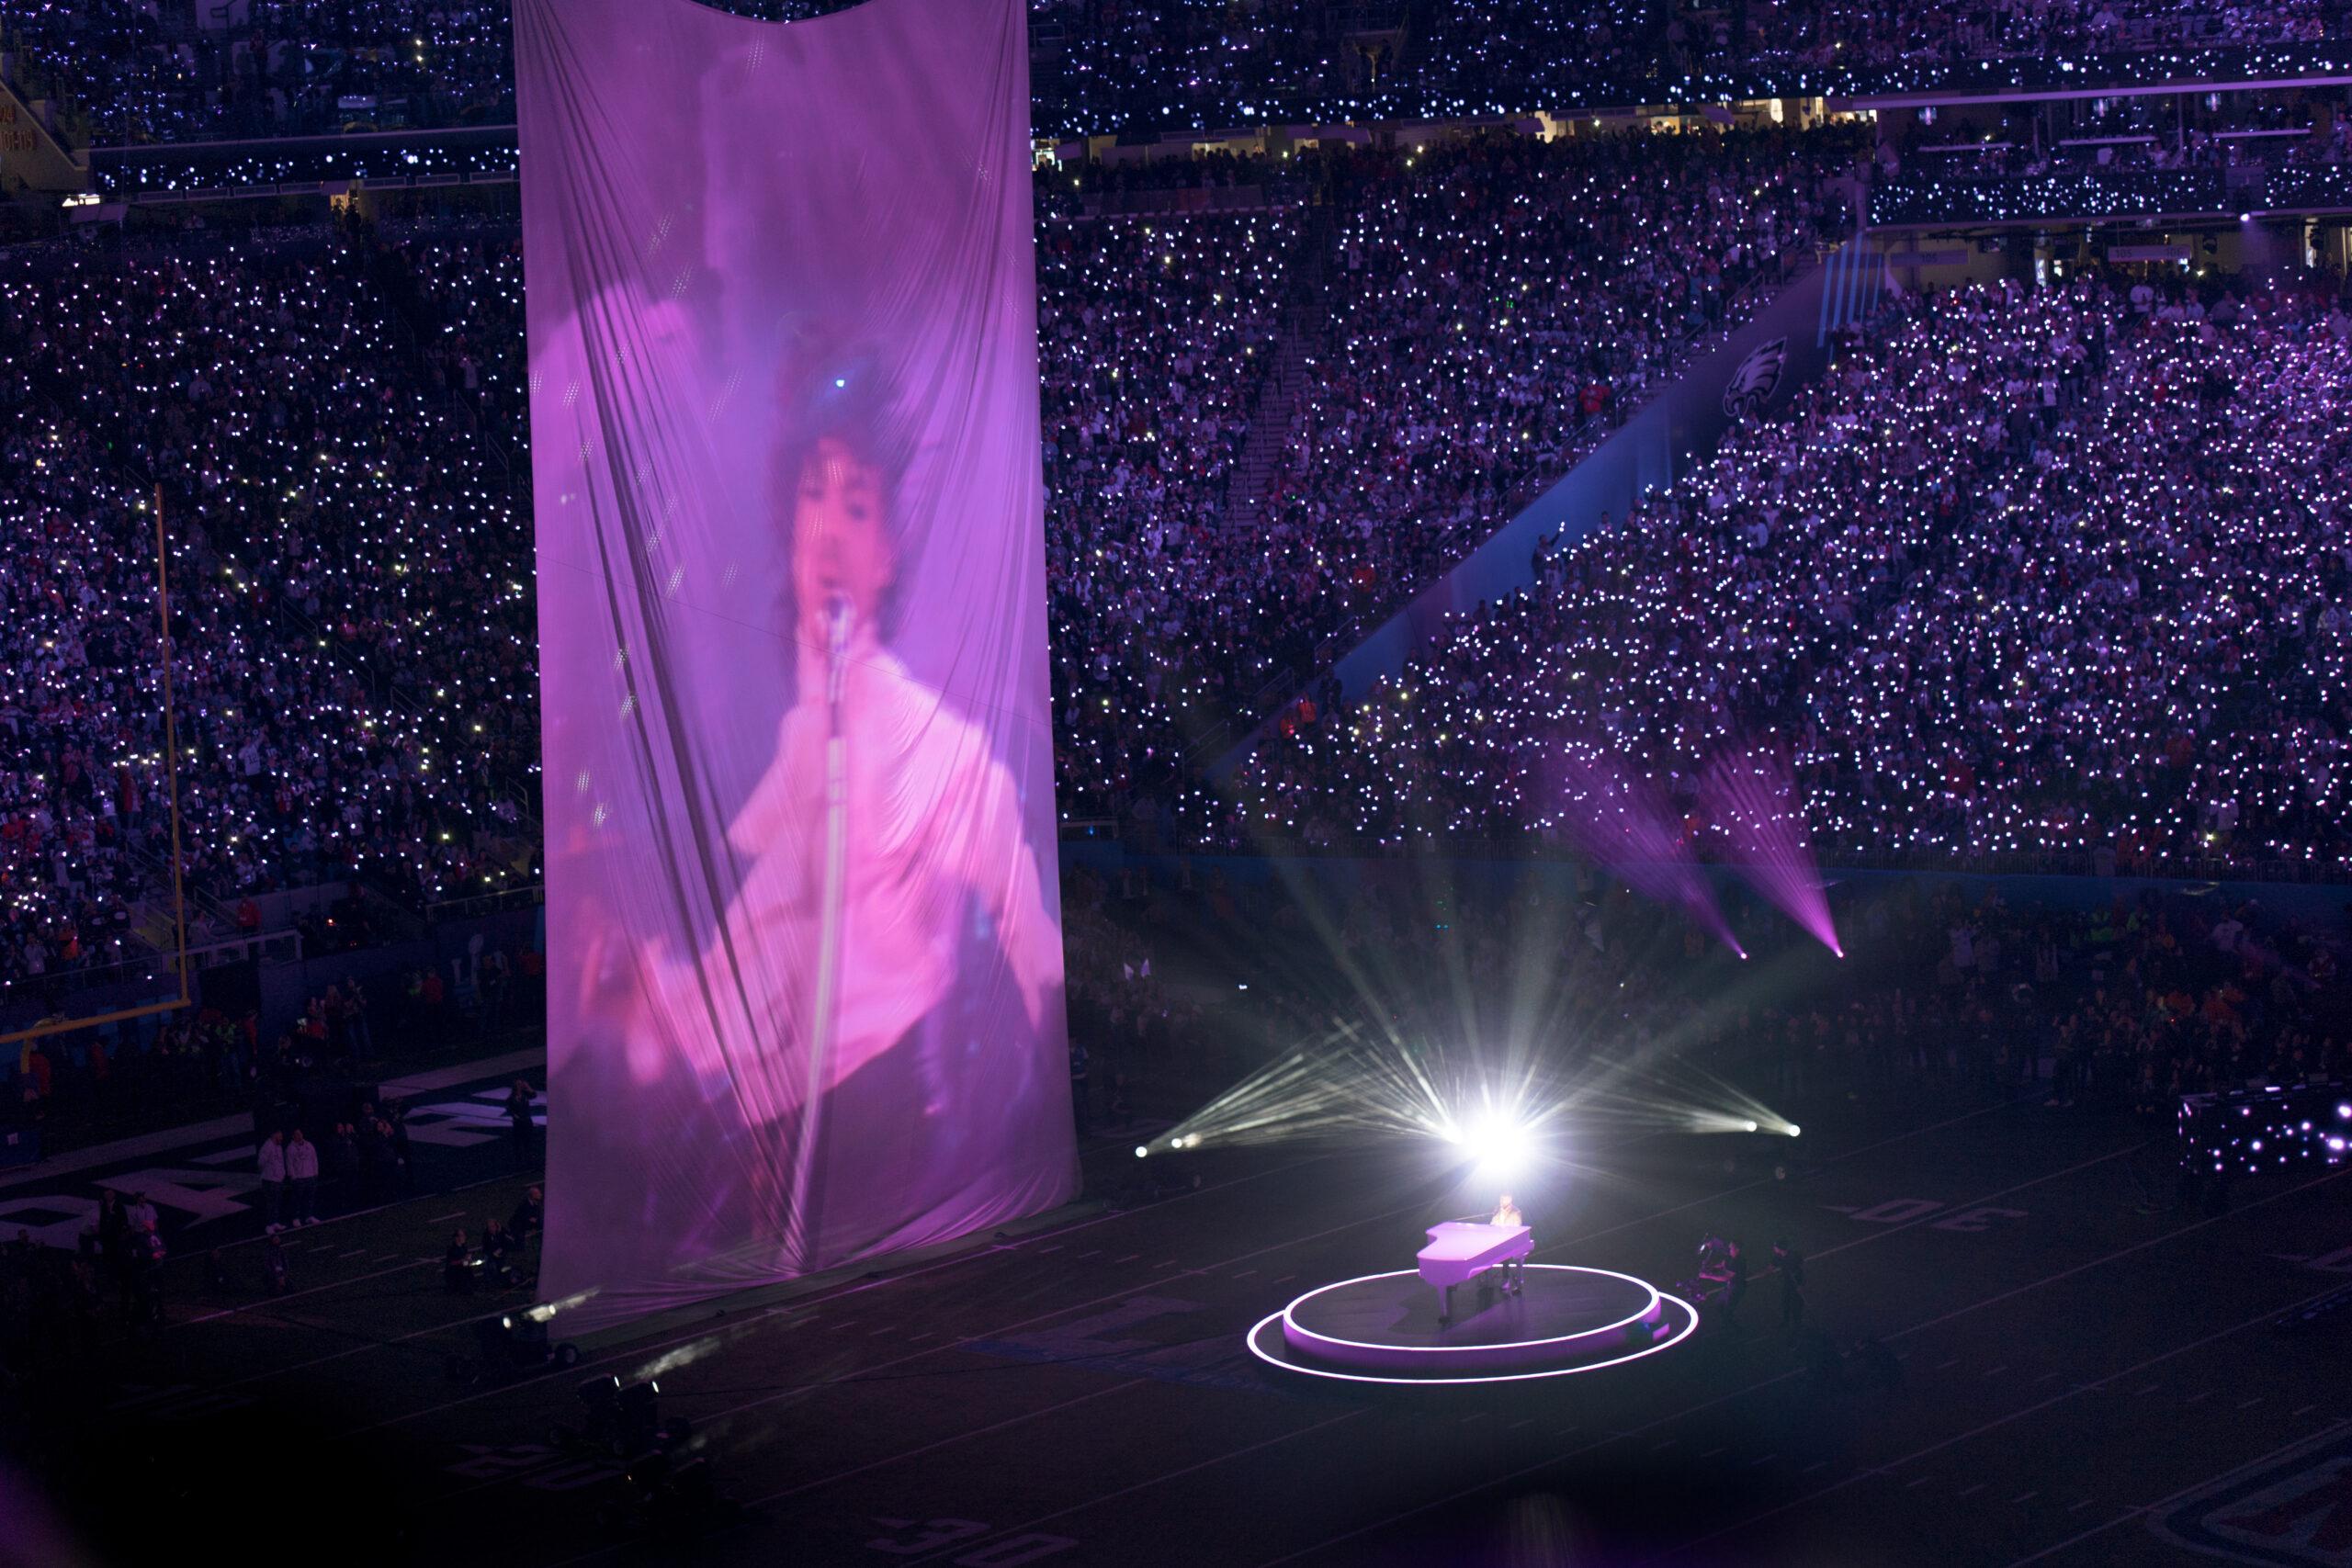 //A_Prince_projection_shows_up_at_the_Super_Bowl_LII_Half_Time_Show_Minneapolis_MN_ scaled